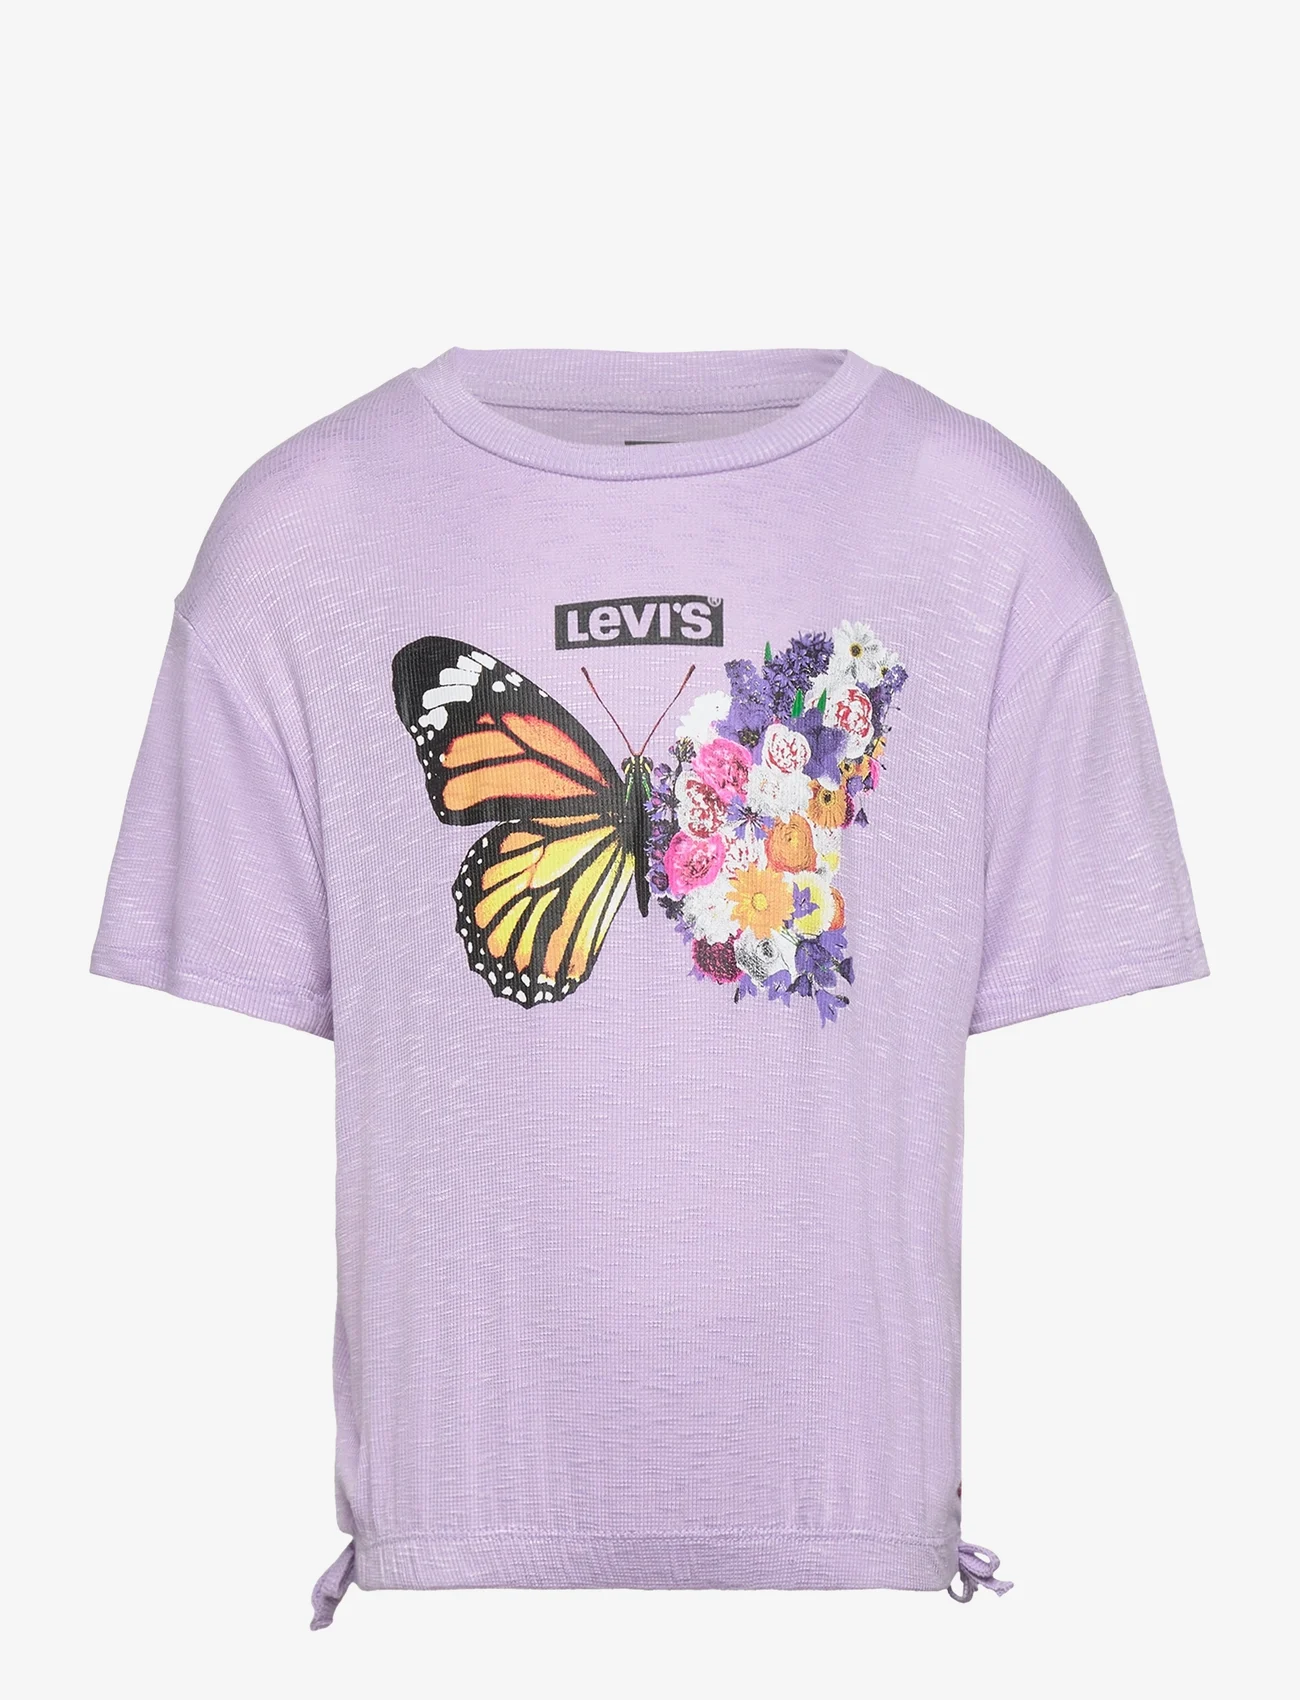 Levi's - Levi's Meet and Greet Cinched Top - short-sleeved t-shirts - pink - 0